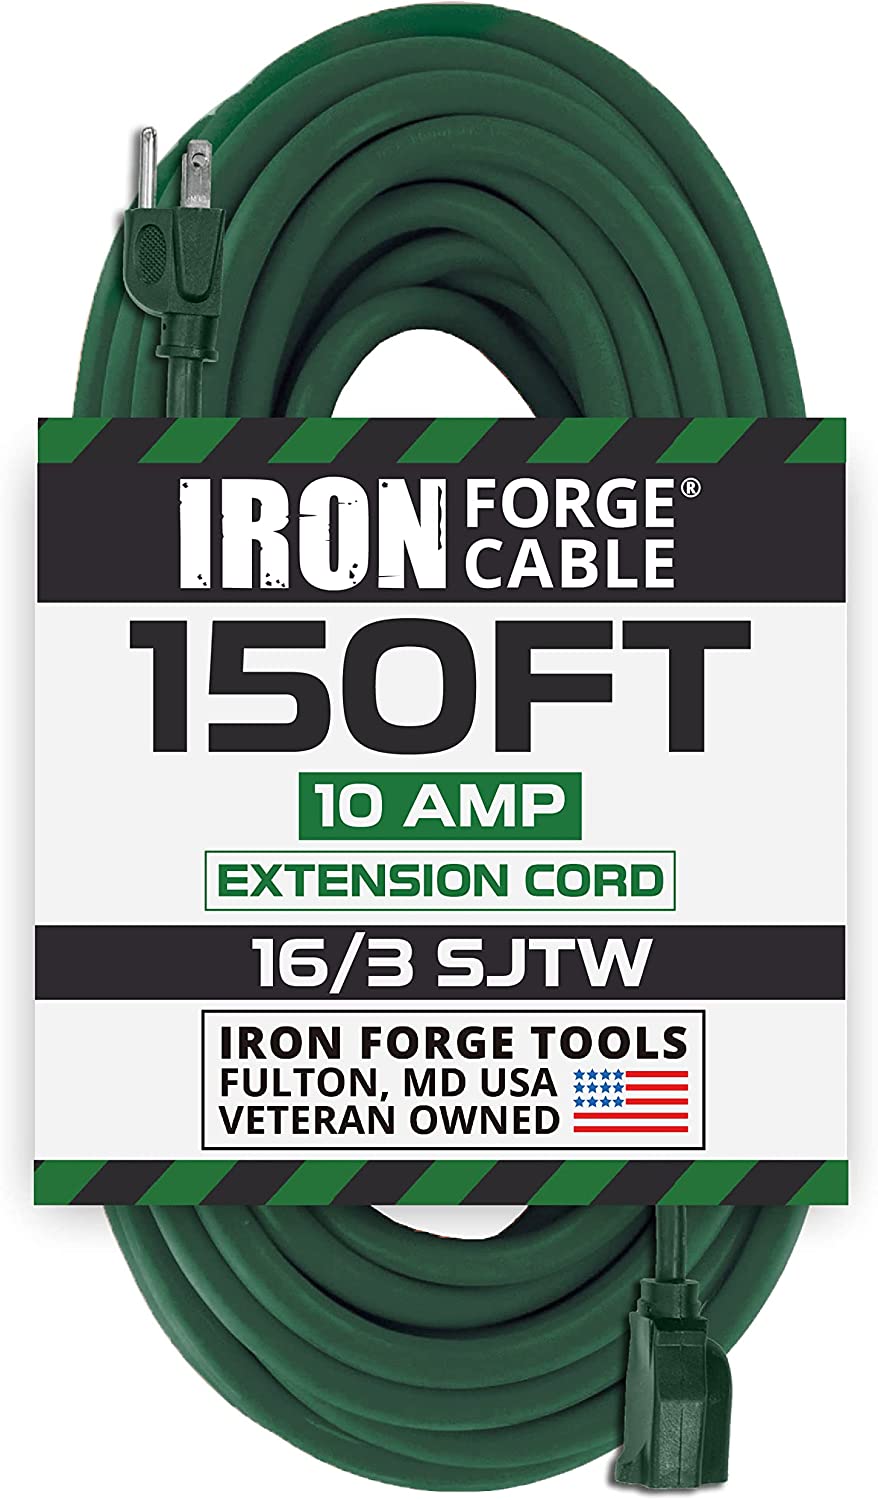 Cord Reels - iron forge tools